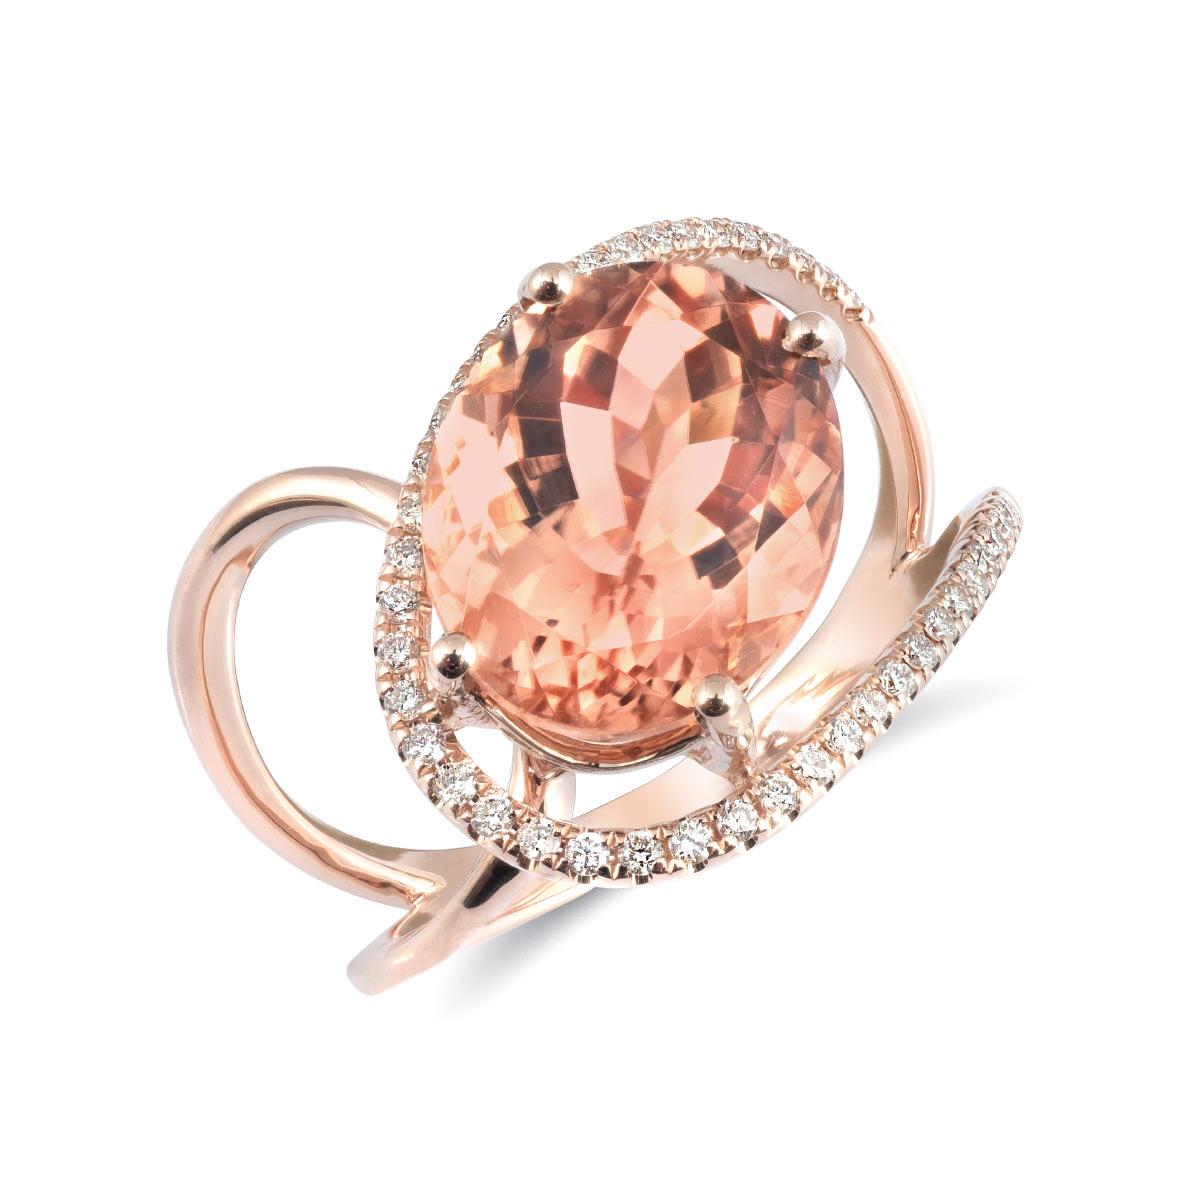 4.66 Carats Orange-Pink Tourmaline Diamonds set in 14K Rose Gold Ring In New Condition For Sale In Los Angeles, CA